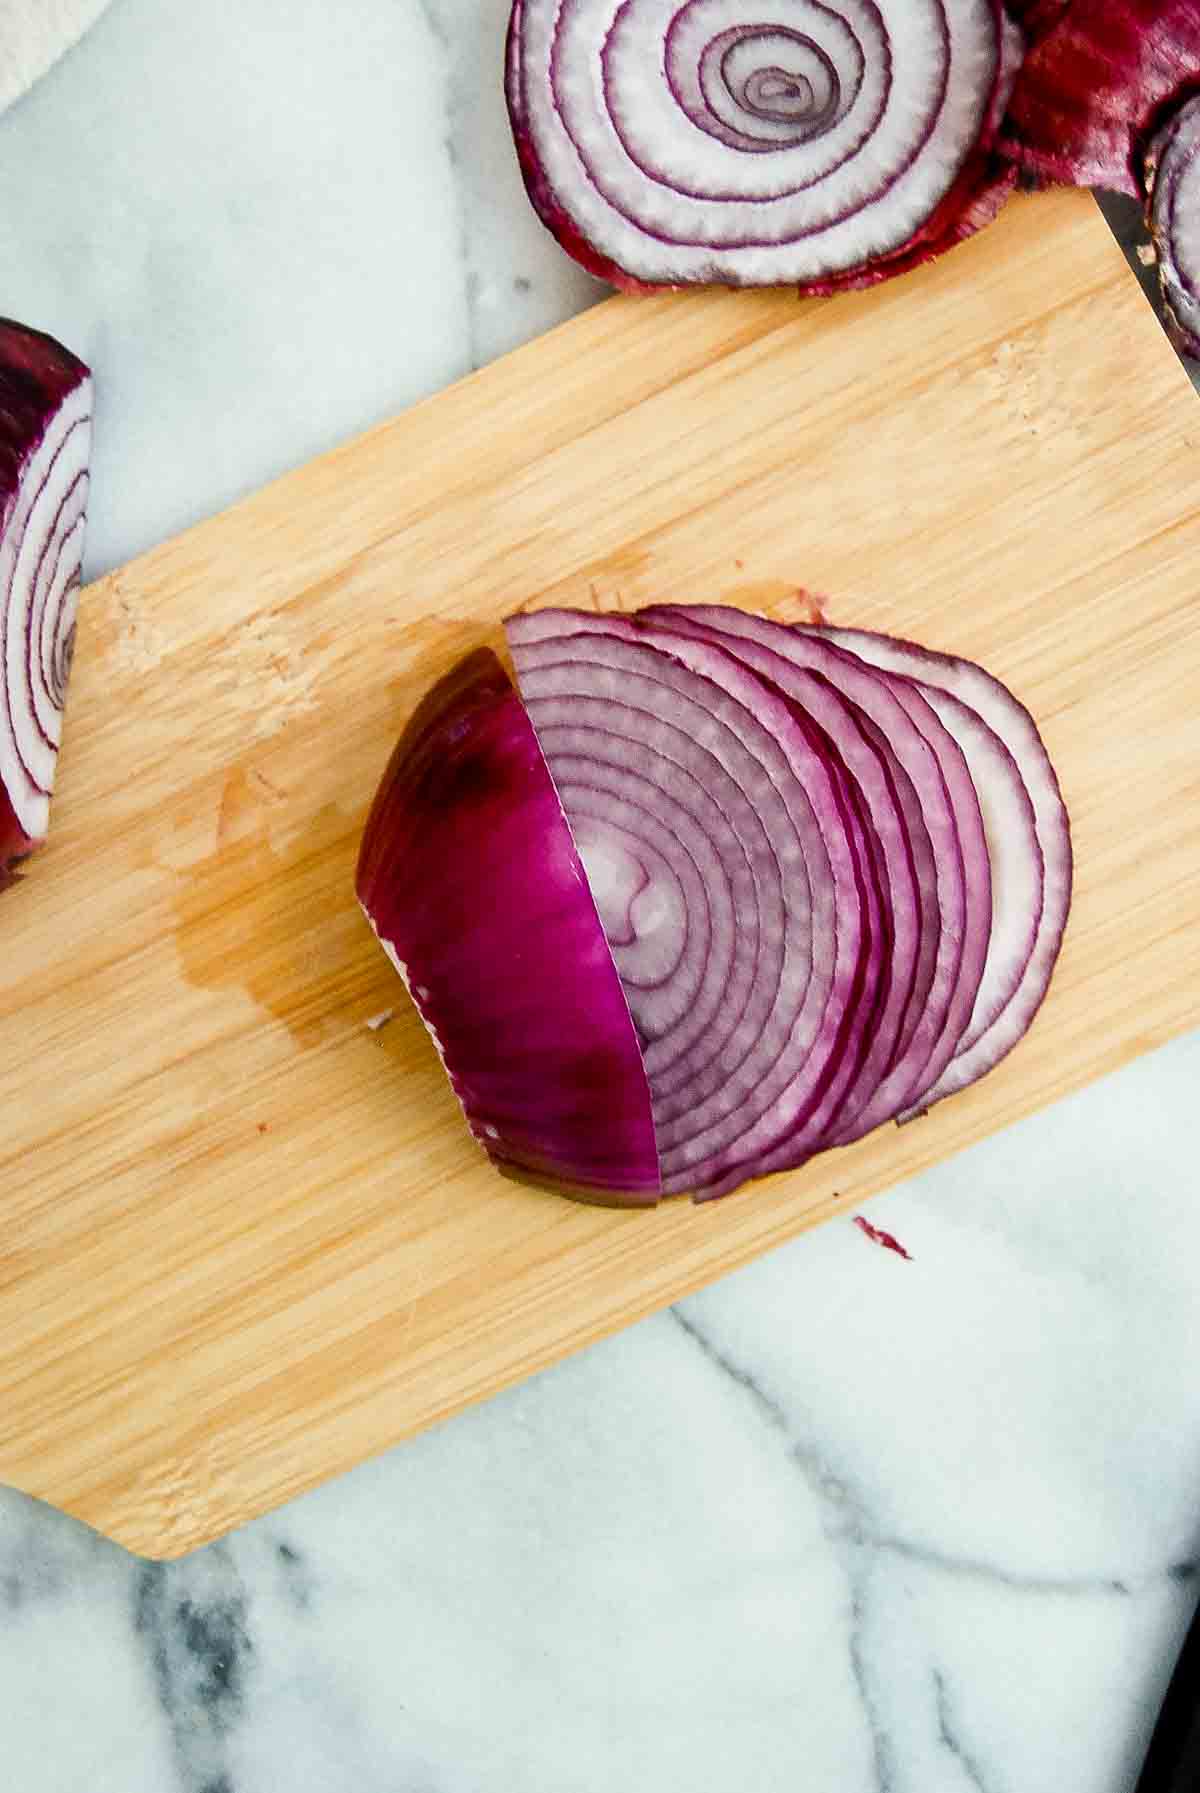 1 part of sliced onion on cutting board.